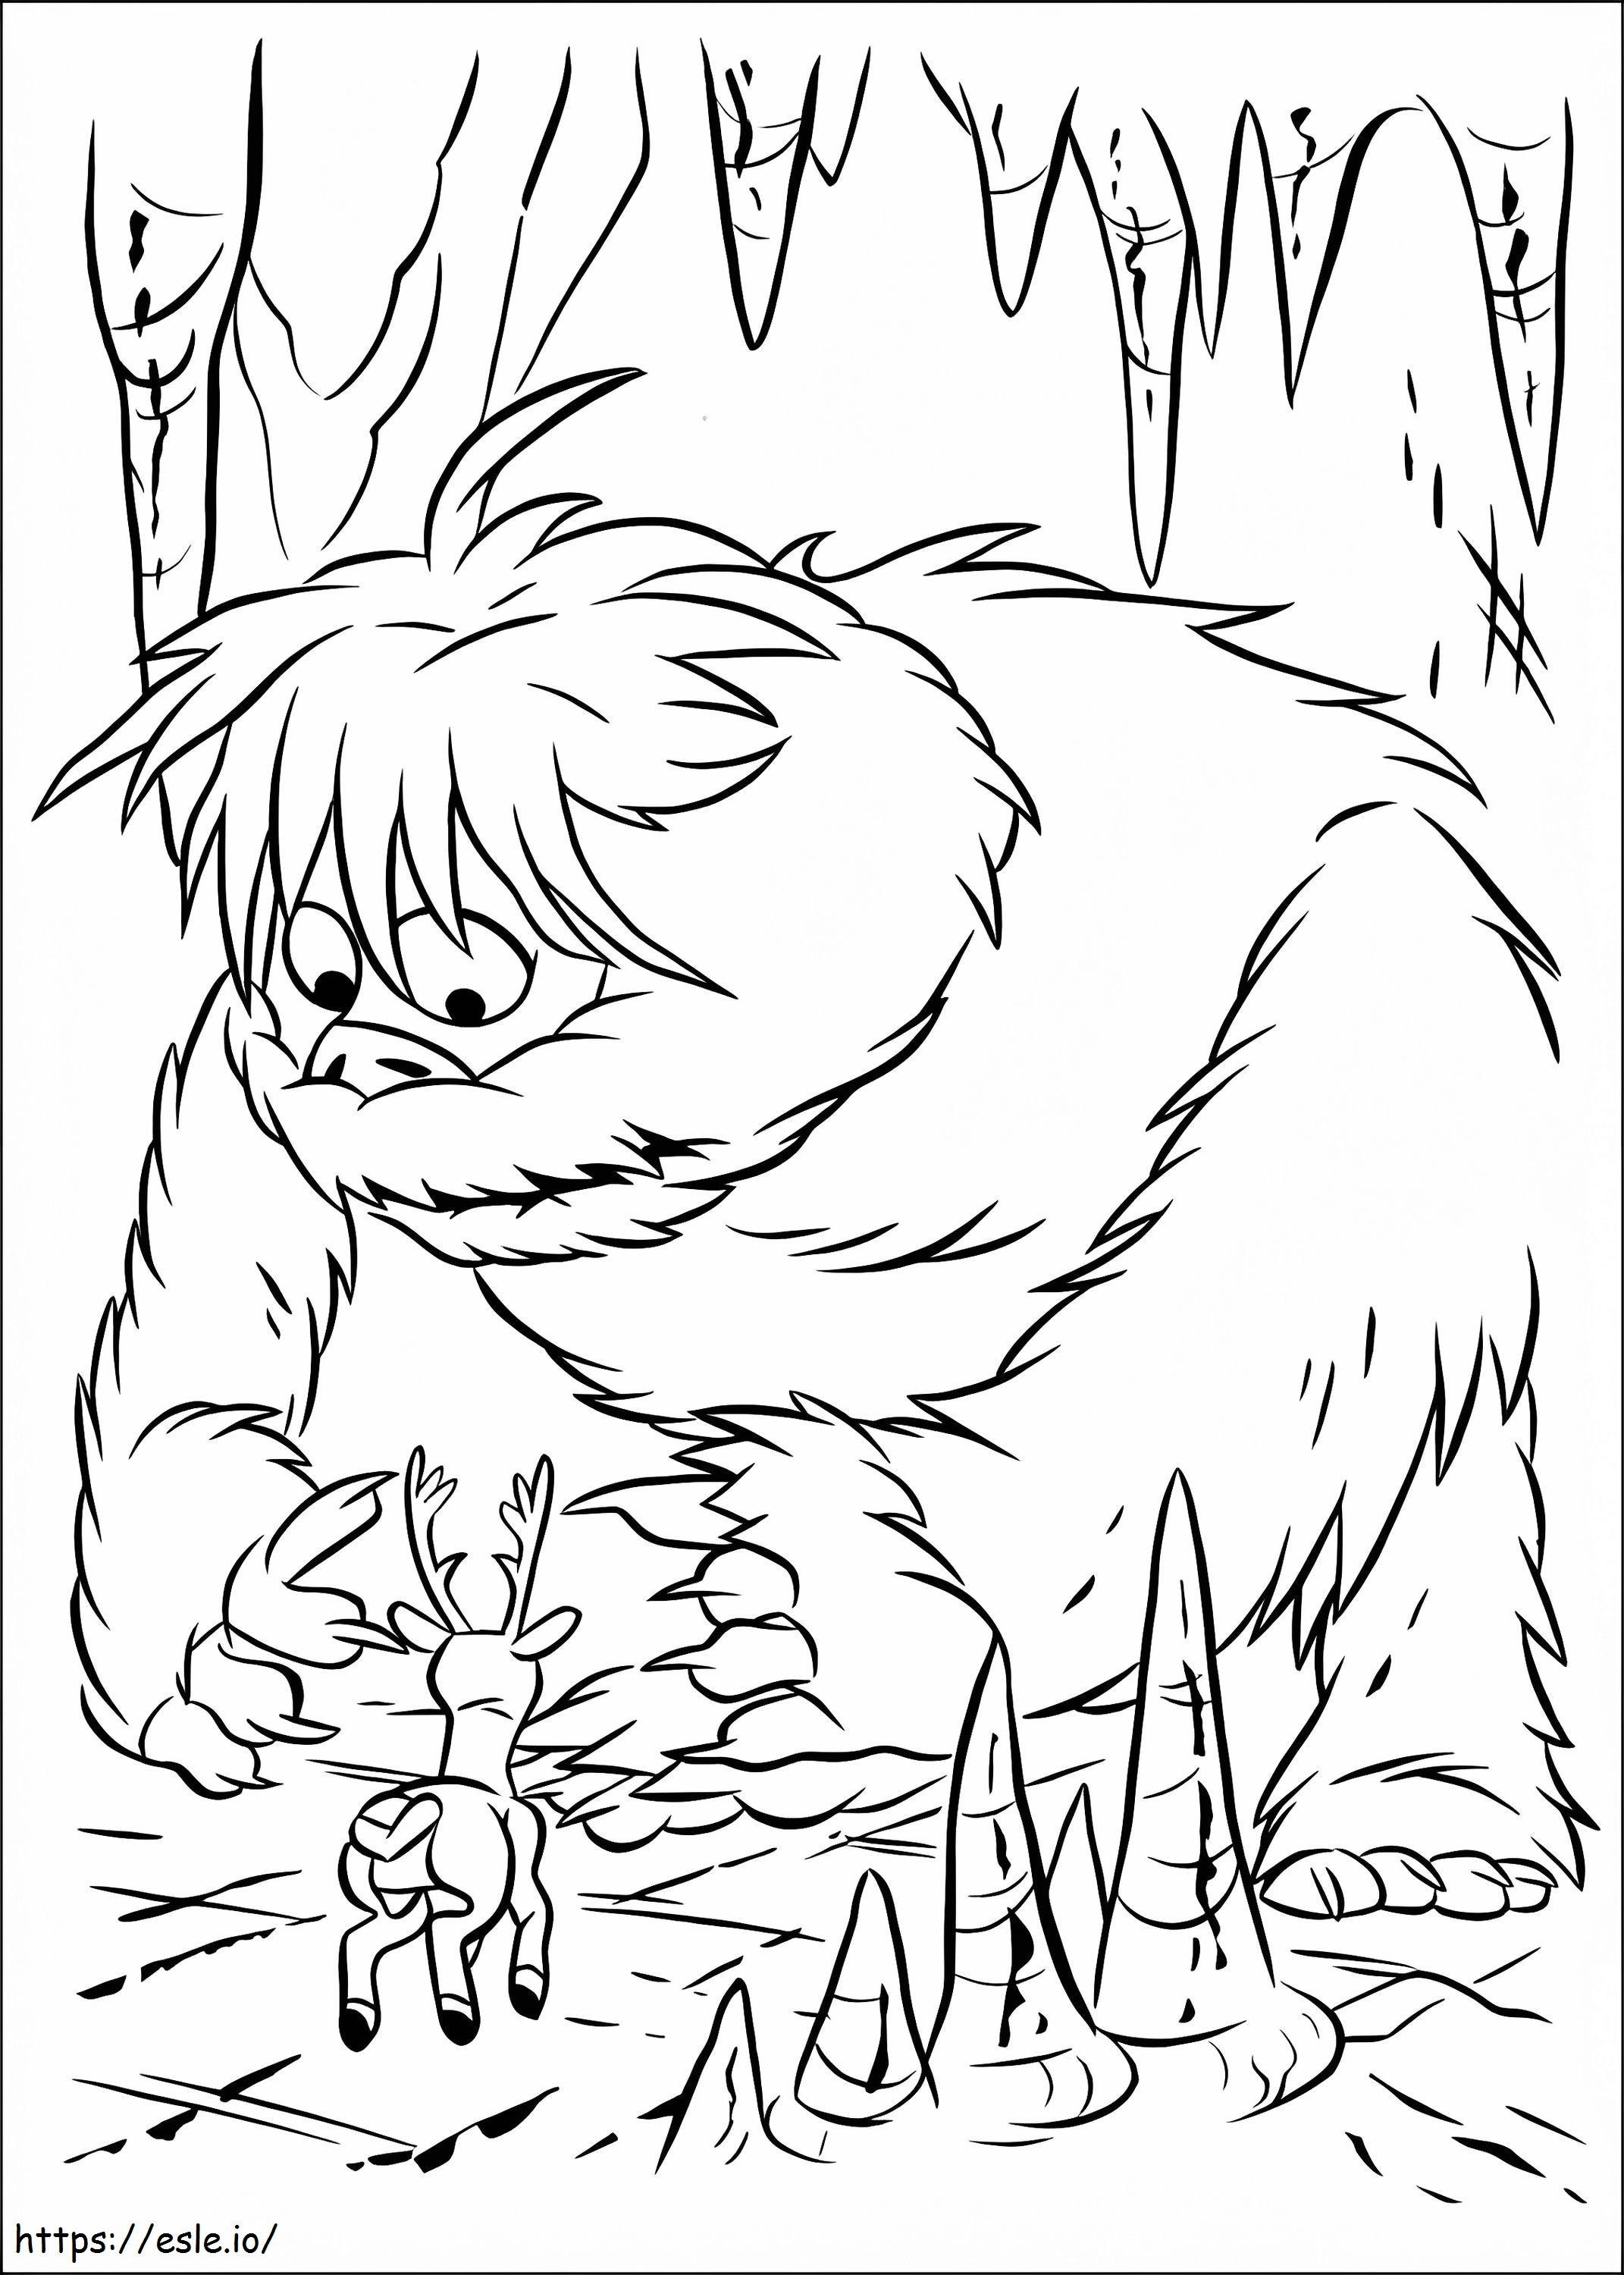 Snowmonster And Rudolph coloring page